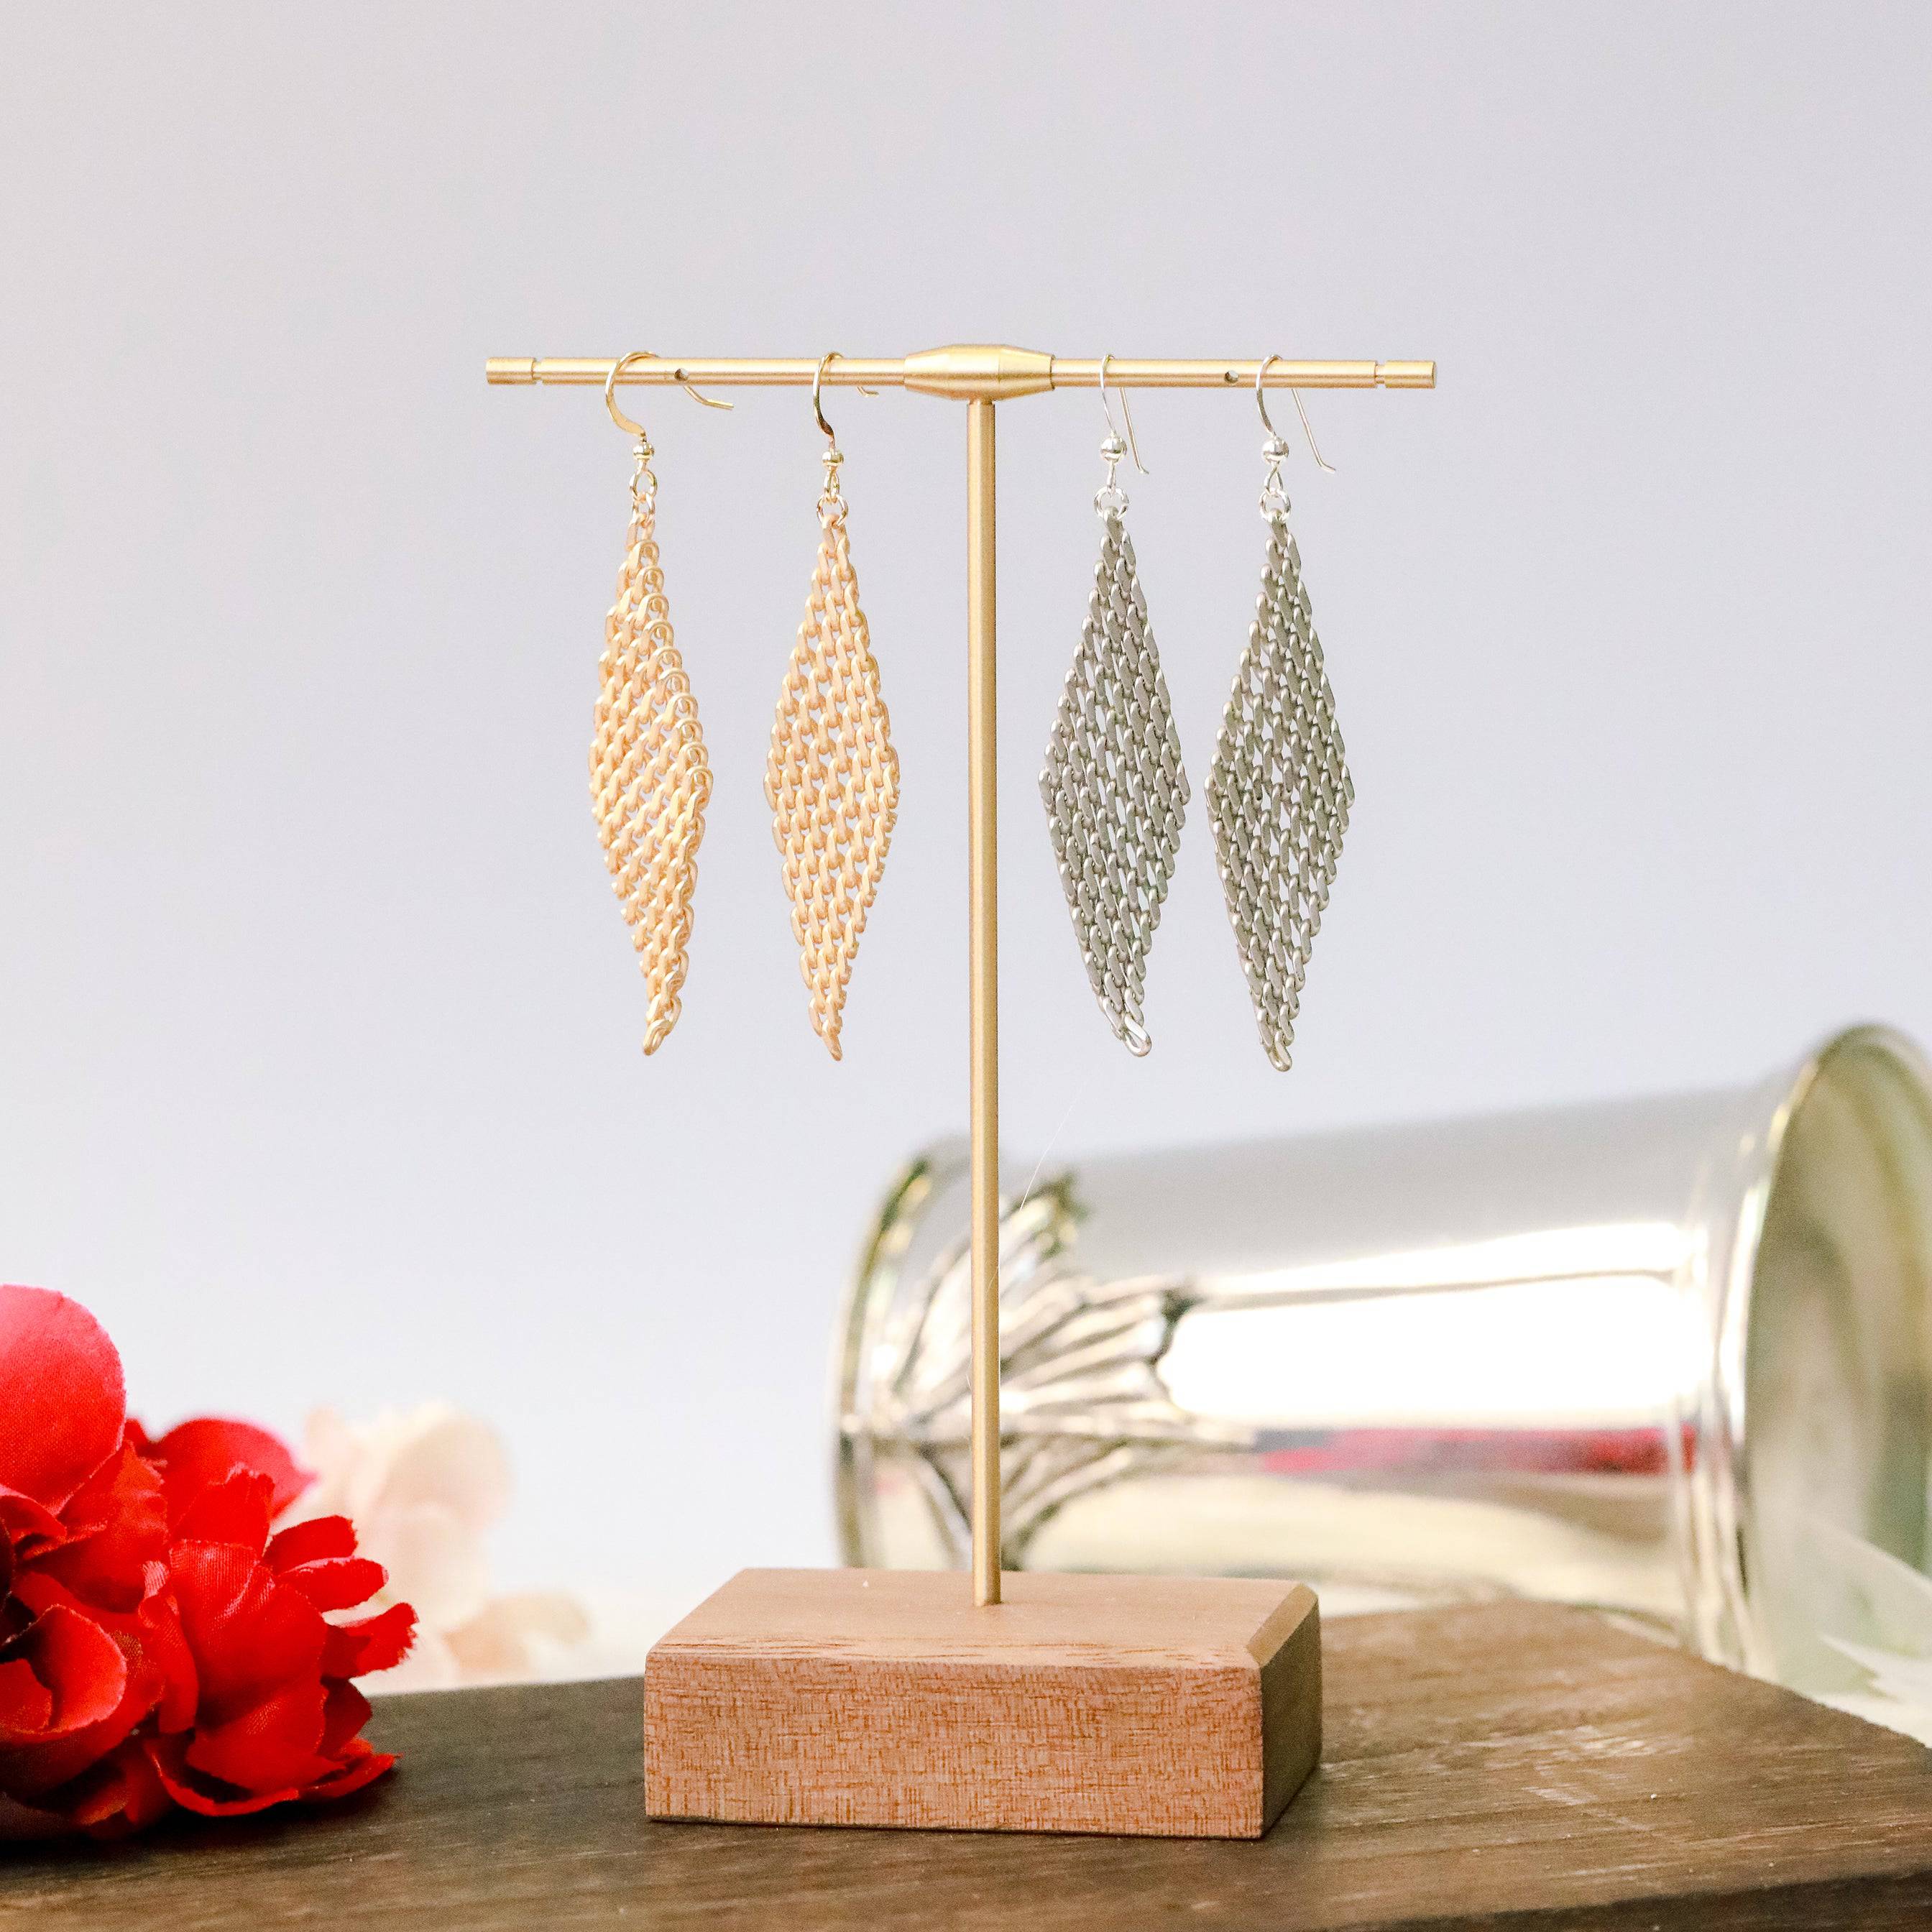 Mithril Earrings - The Gilded Witch